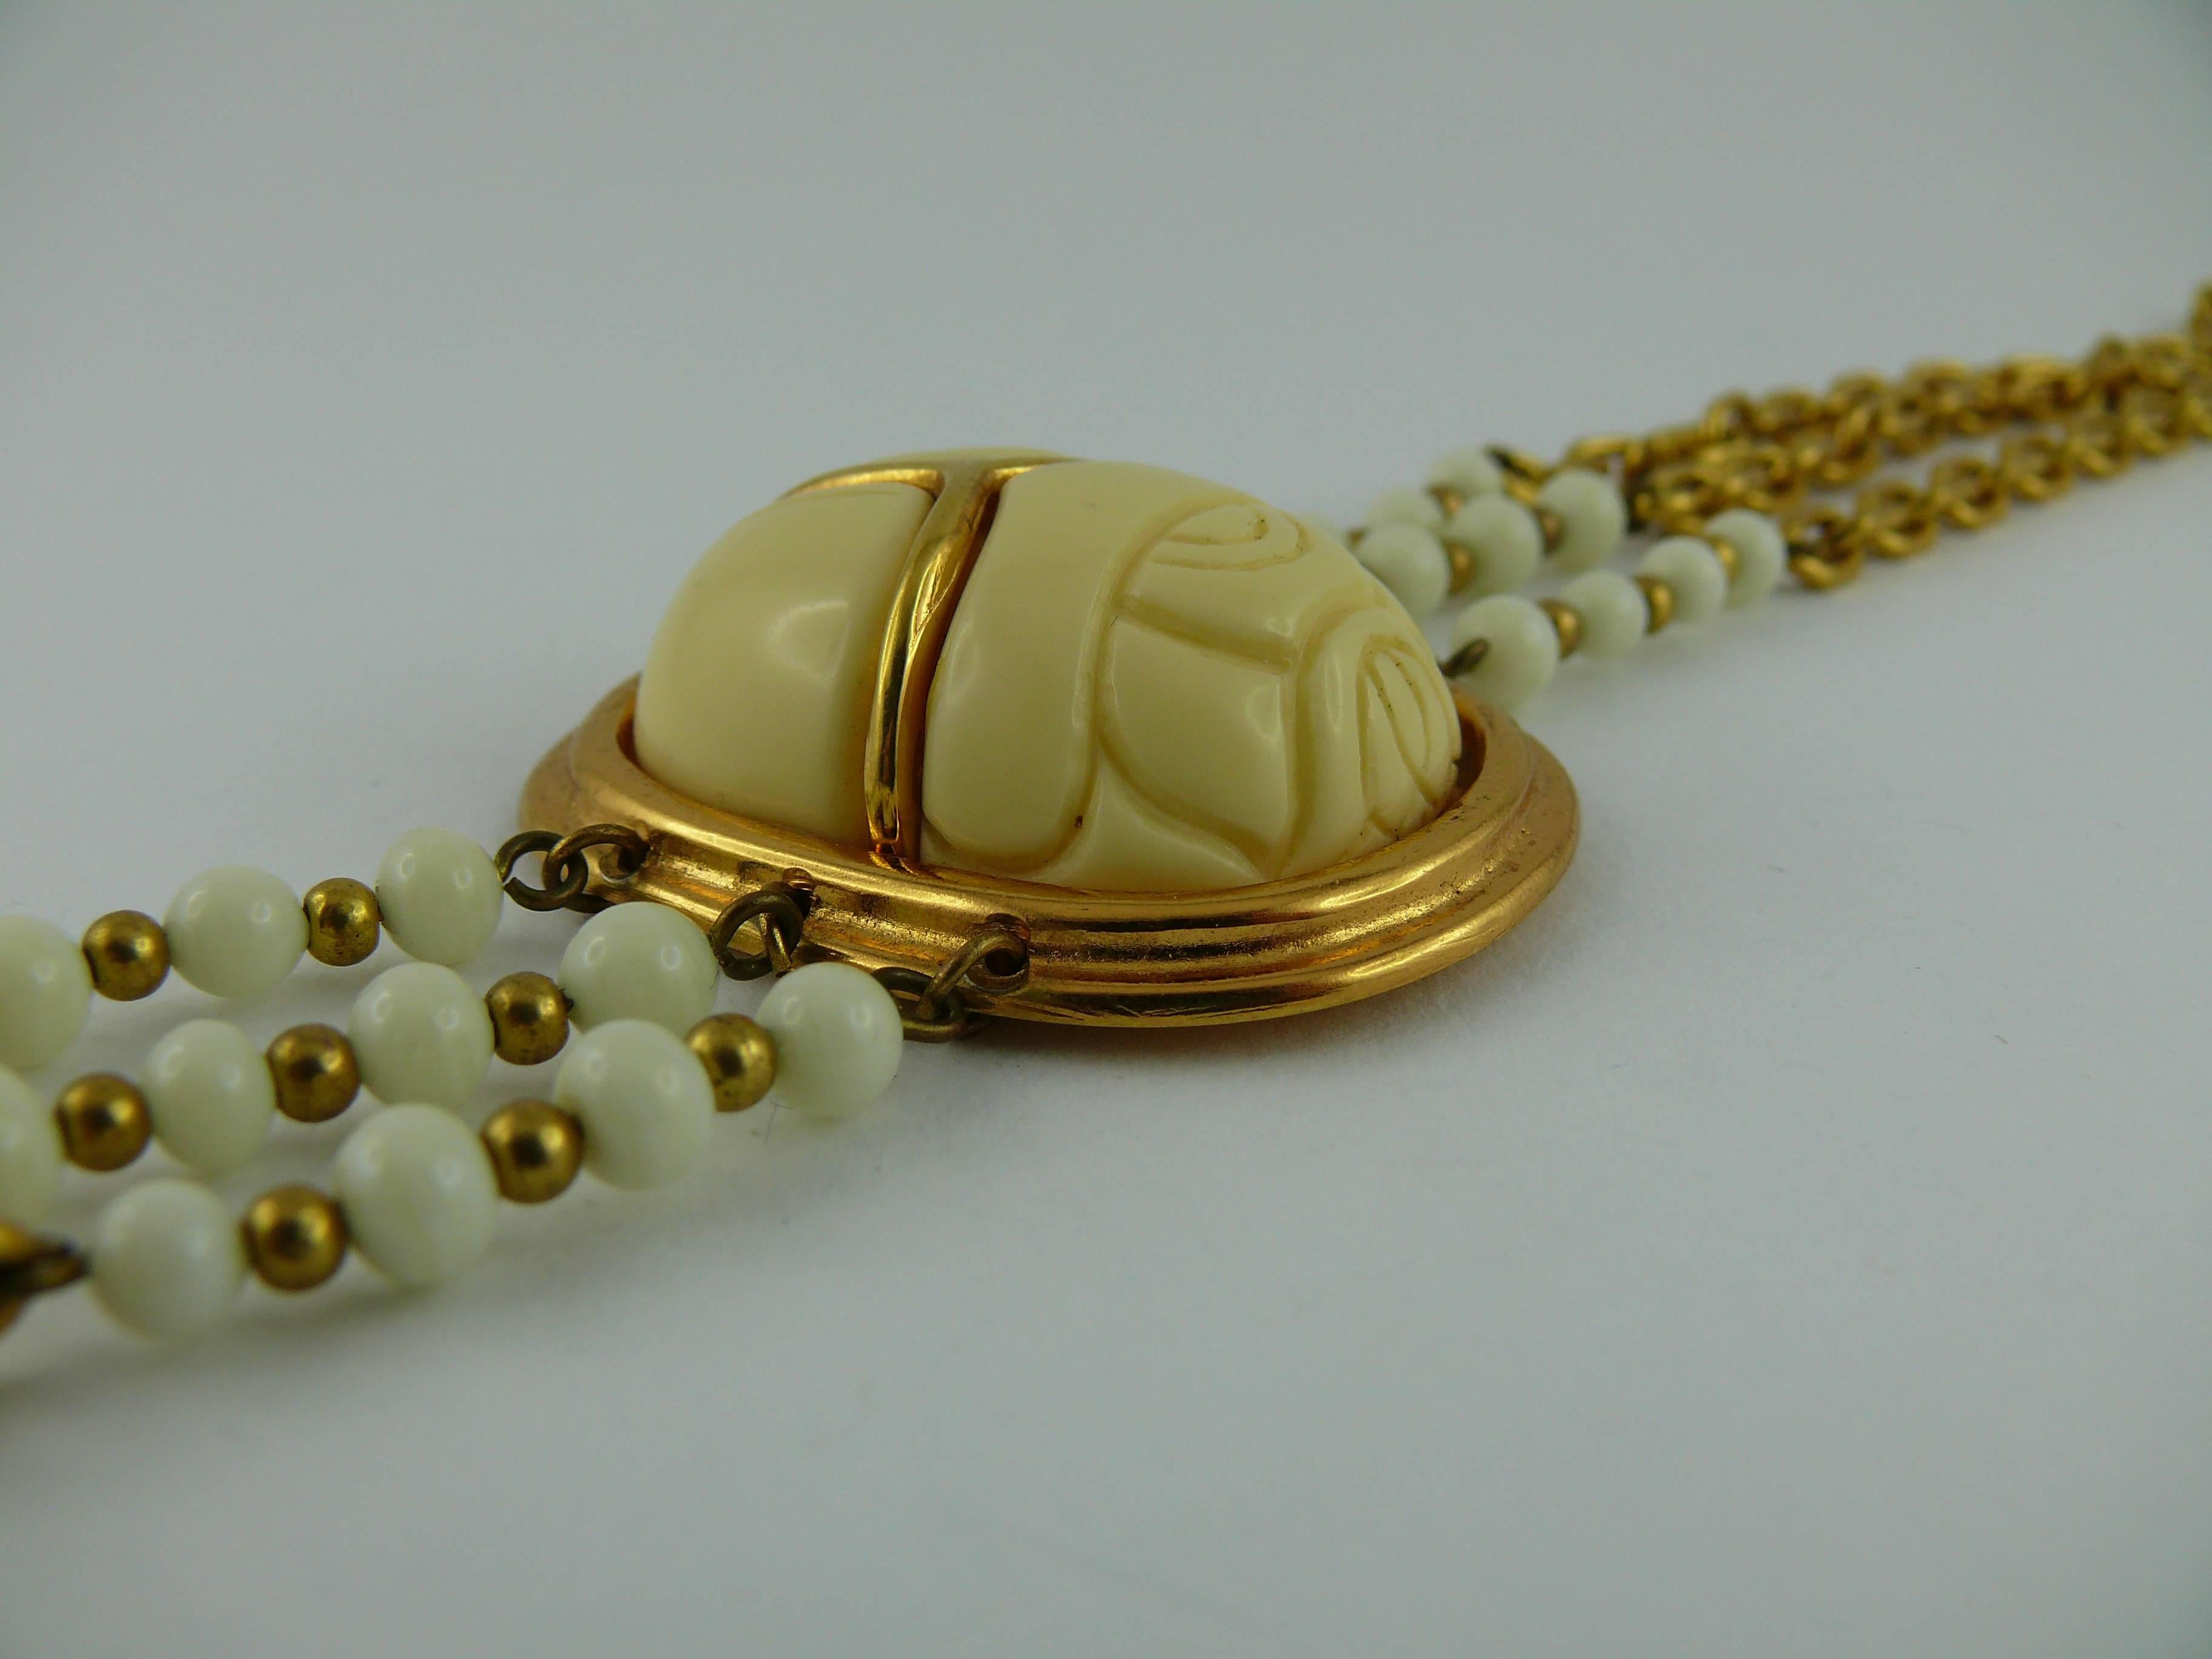 PIERRE BALMAIN vintage Egyptian revival scarab choker necklace.

This necklace consists of three raws of gold tone chain with white glass beads. Central oval medallion featuring a carved faux ivory scarab in a gold tone setting.

Embossed